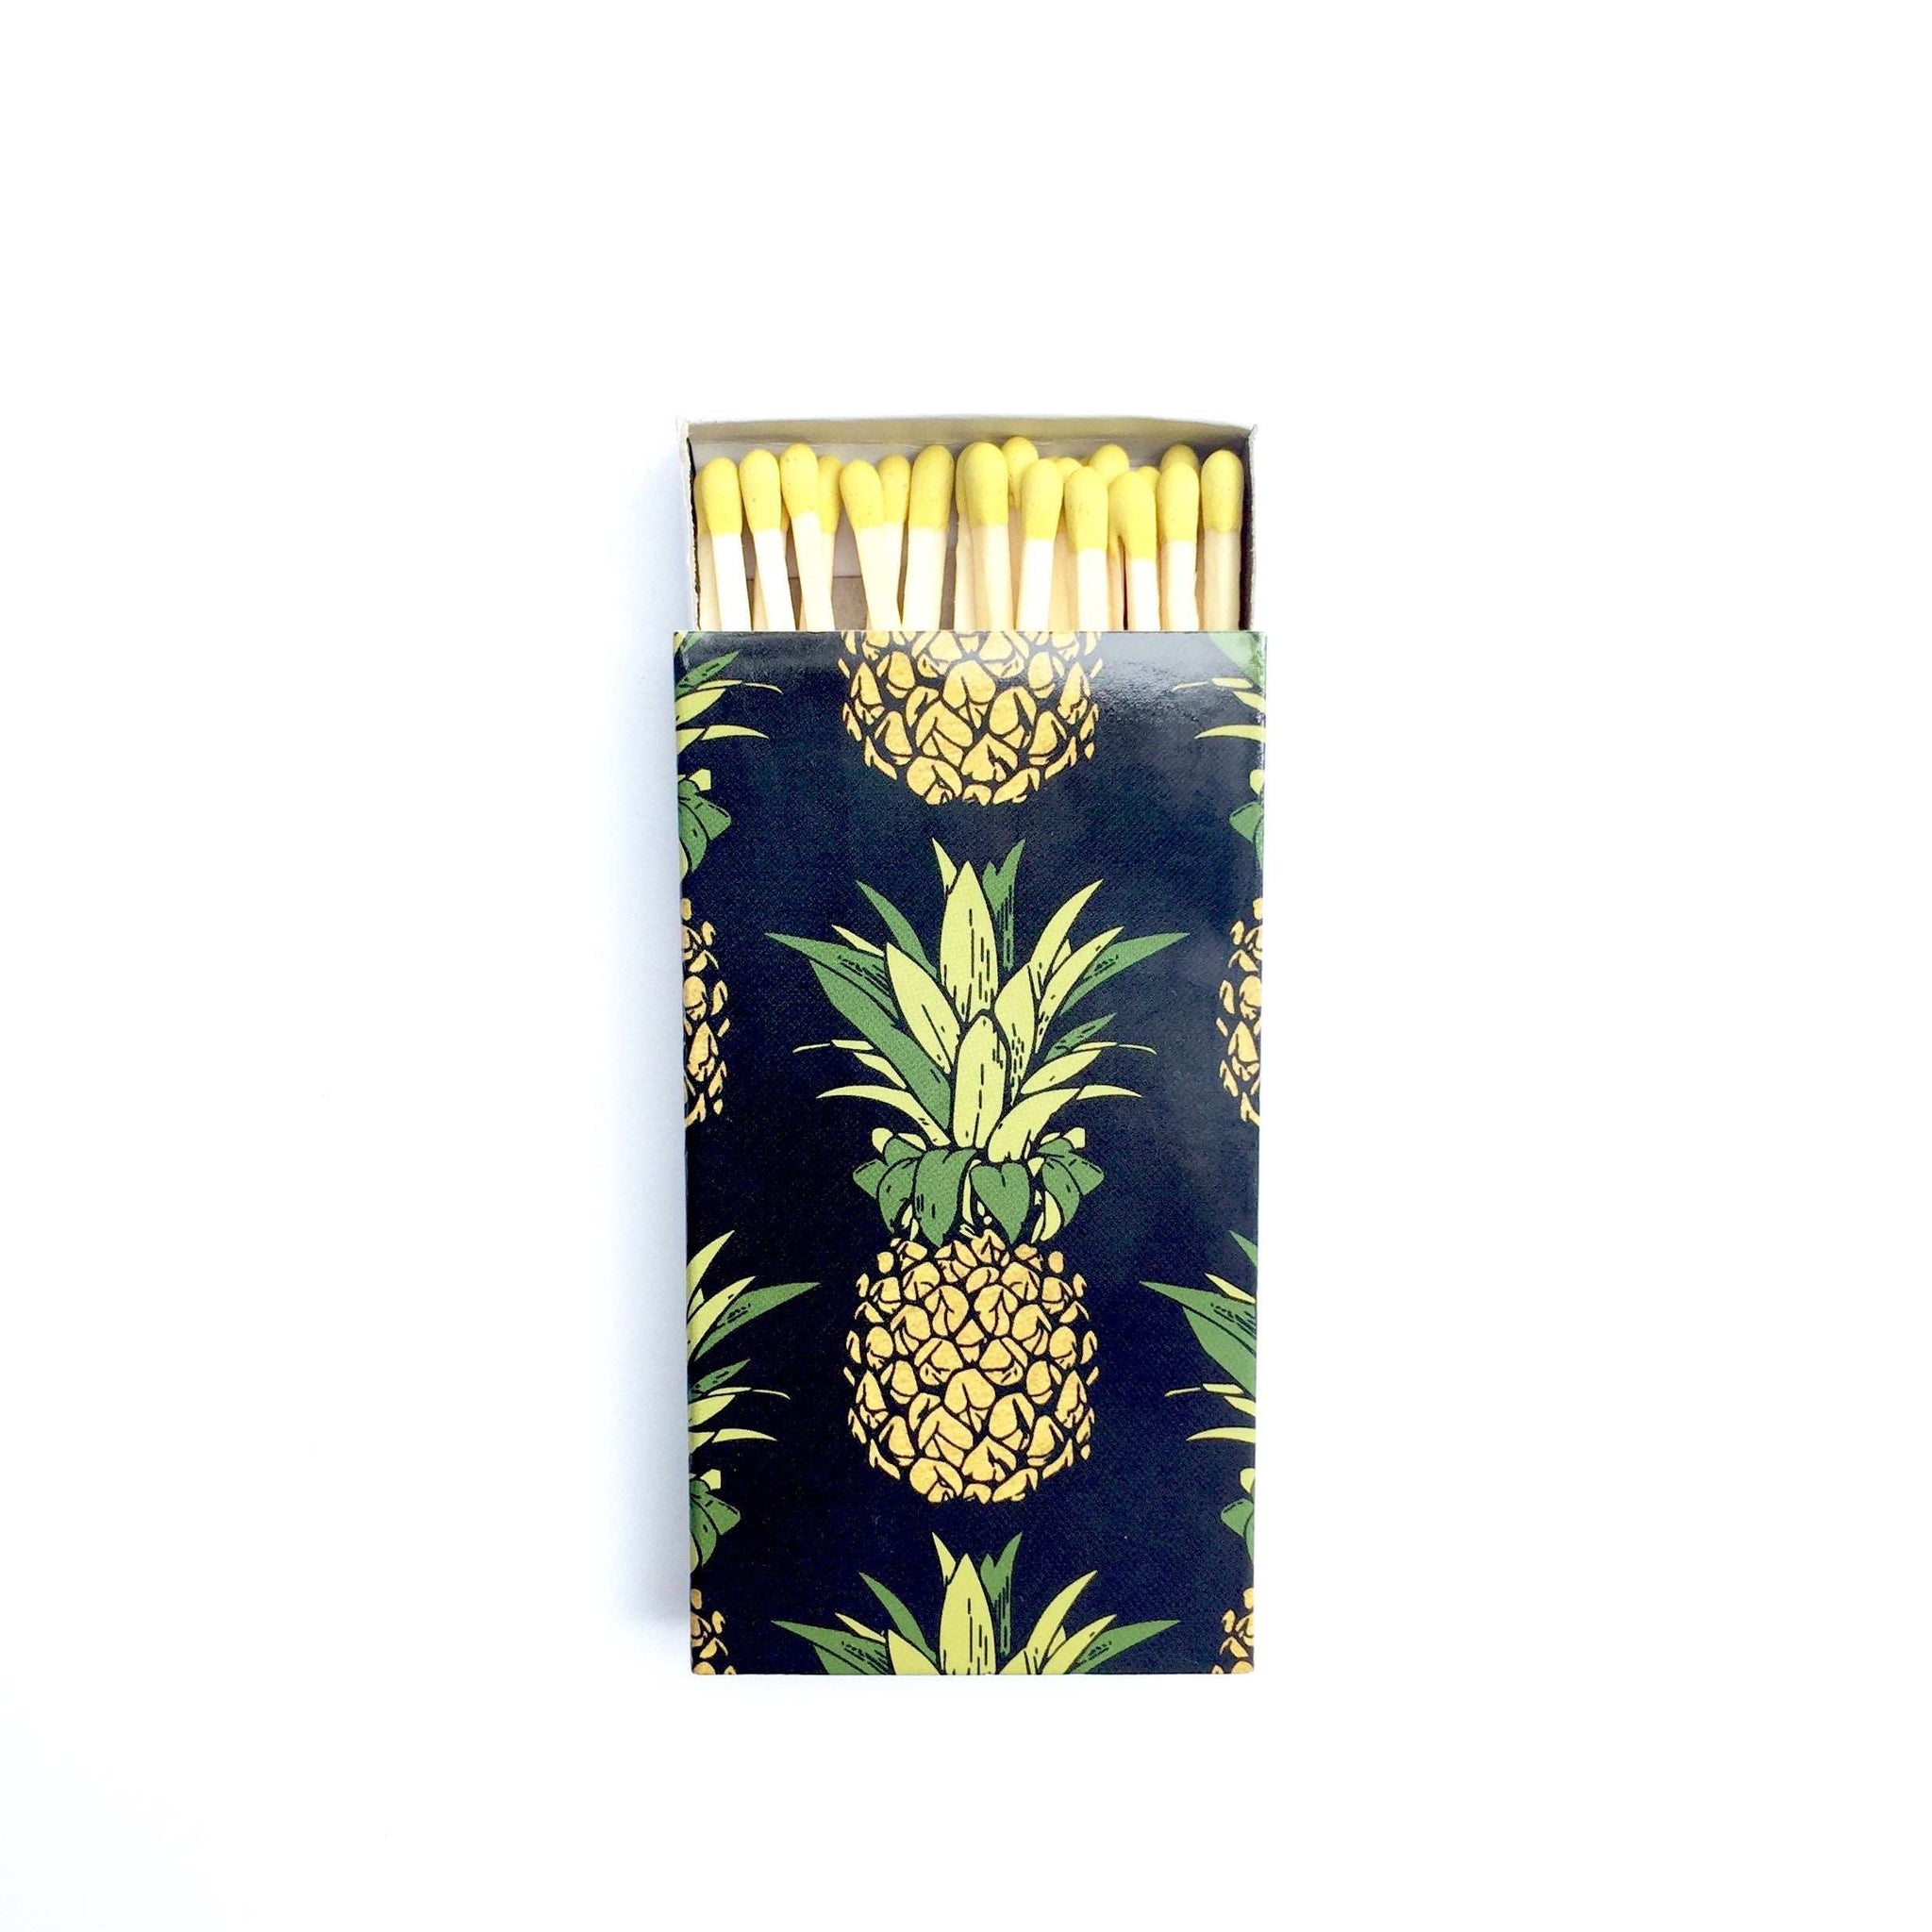 These Pineapple jumbo matches are perfect for lighting our hand poured soy candles!  These decorative matches are a lovely addition to enhance any home décor.  Our designer match boxes are reusable, and each comes with 50 matches tipped in yellow.